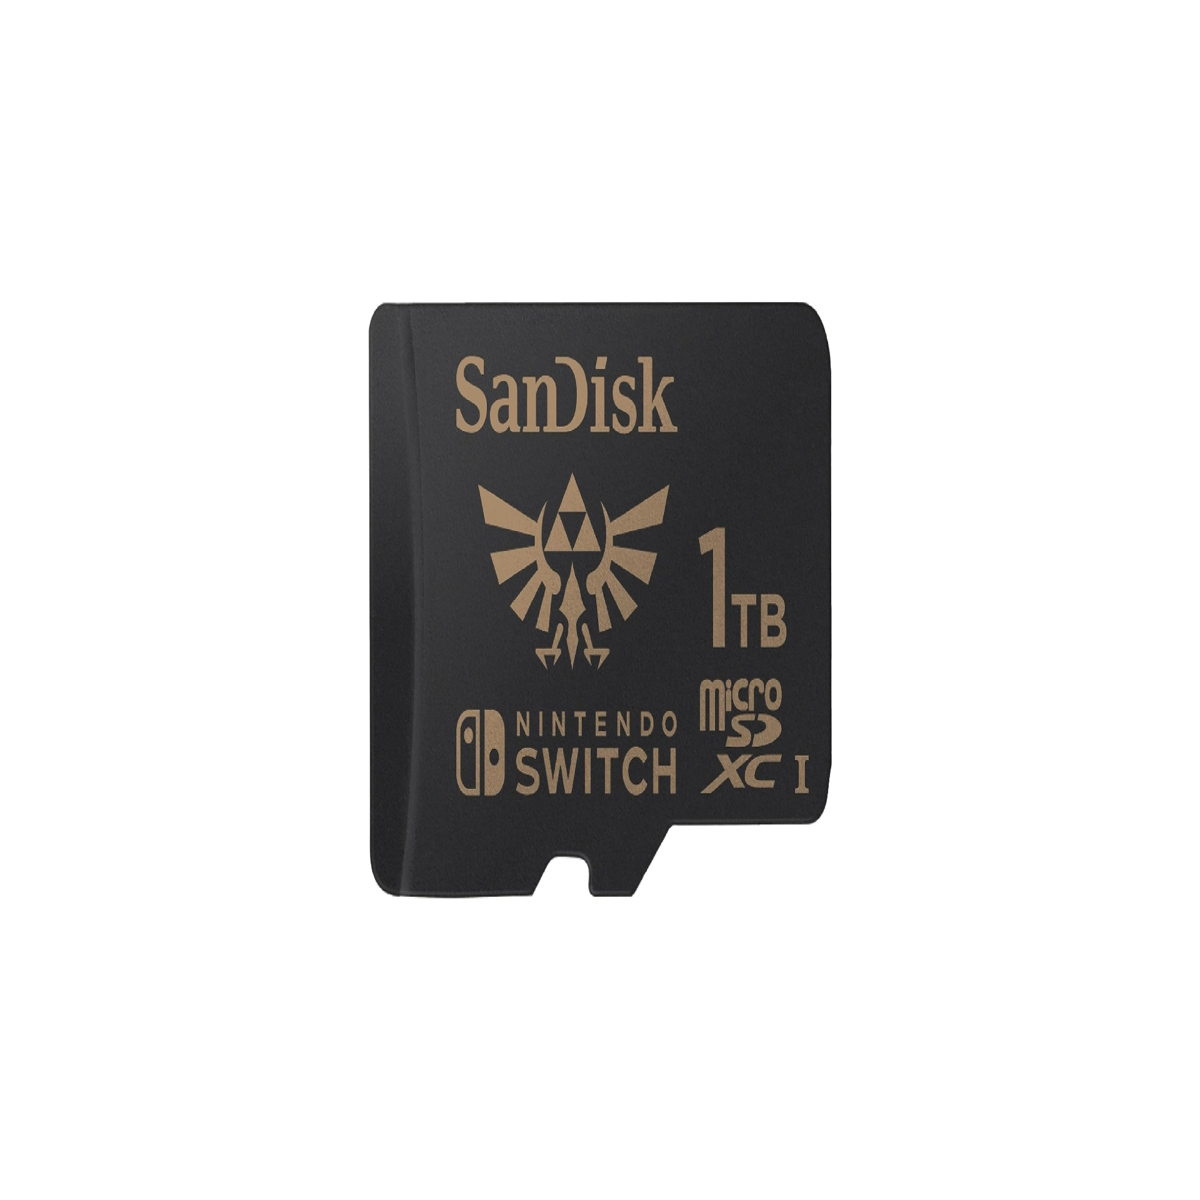 https://assetsio.reedpopcdn.com/sandisk-1tb-micro-sd-nintendo-switch.jpg?width=1200&height=1200&fit=crop&quality=100&format=png&enable=upscale&auto=webp